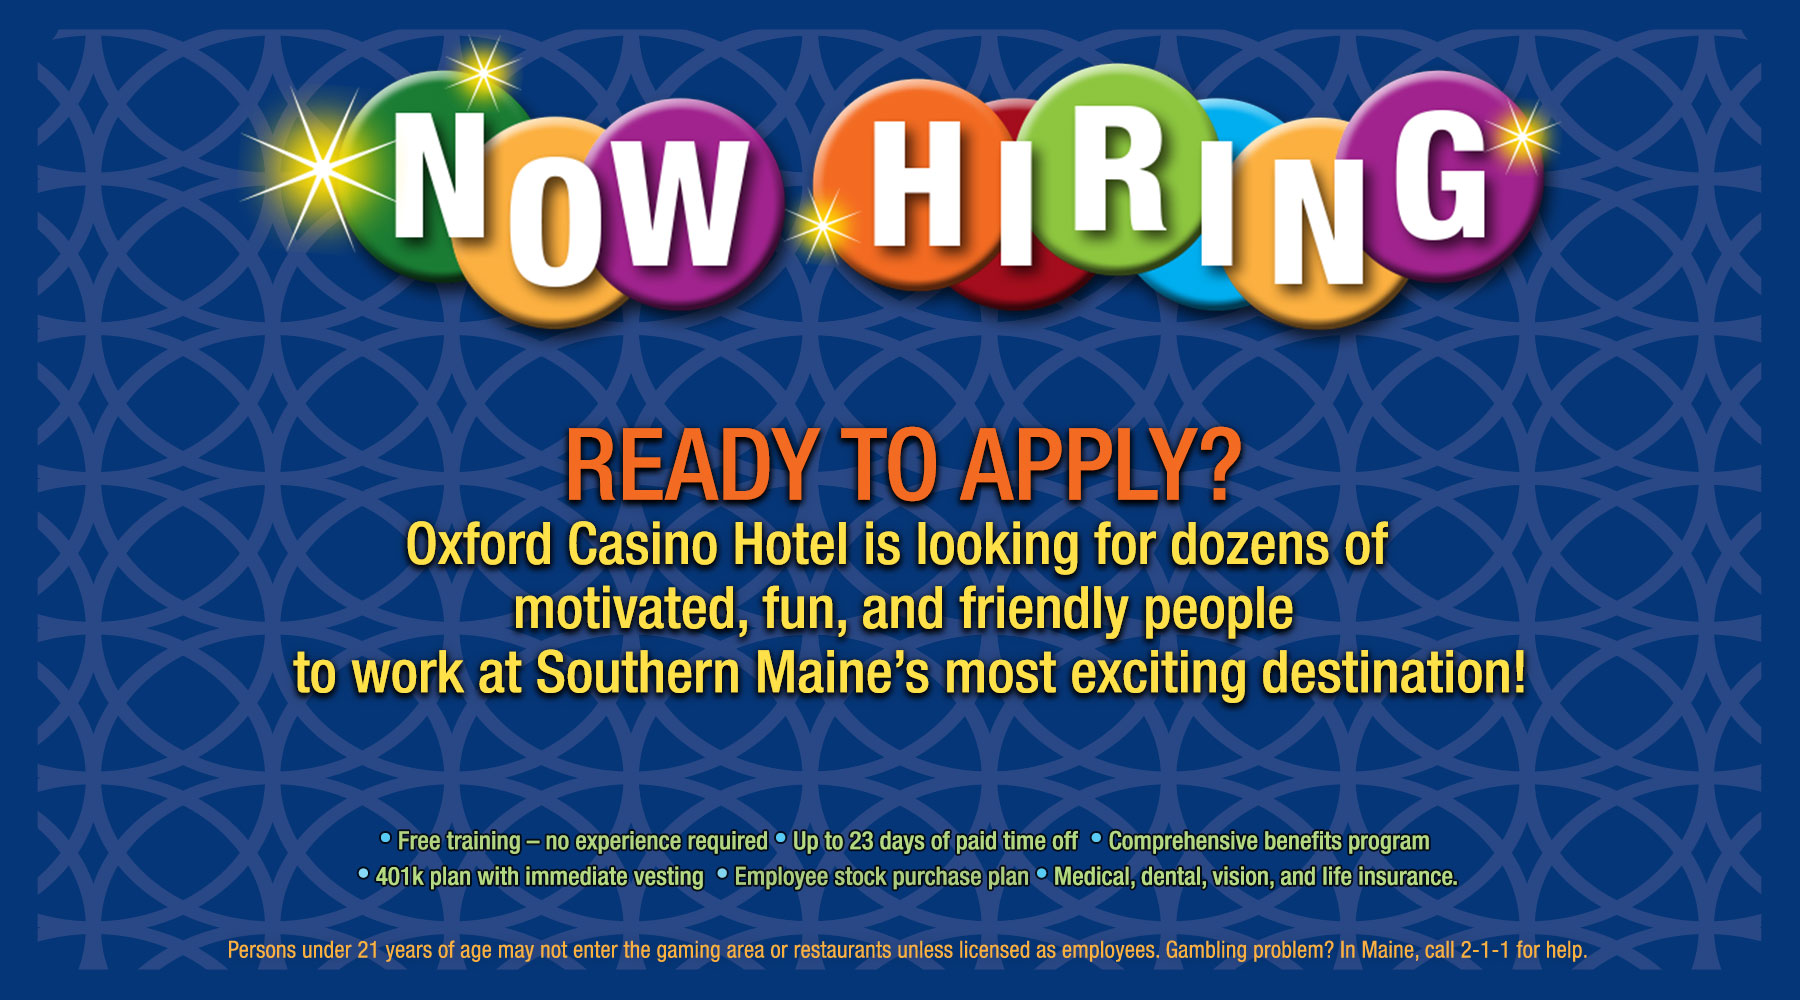 Now Hiring - Apply Now!